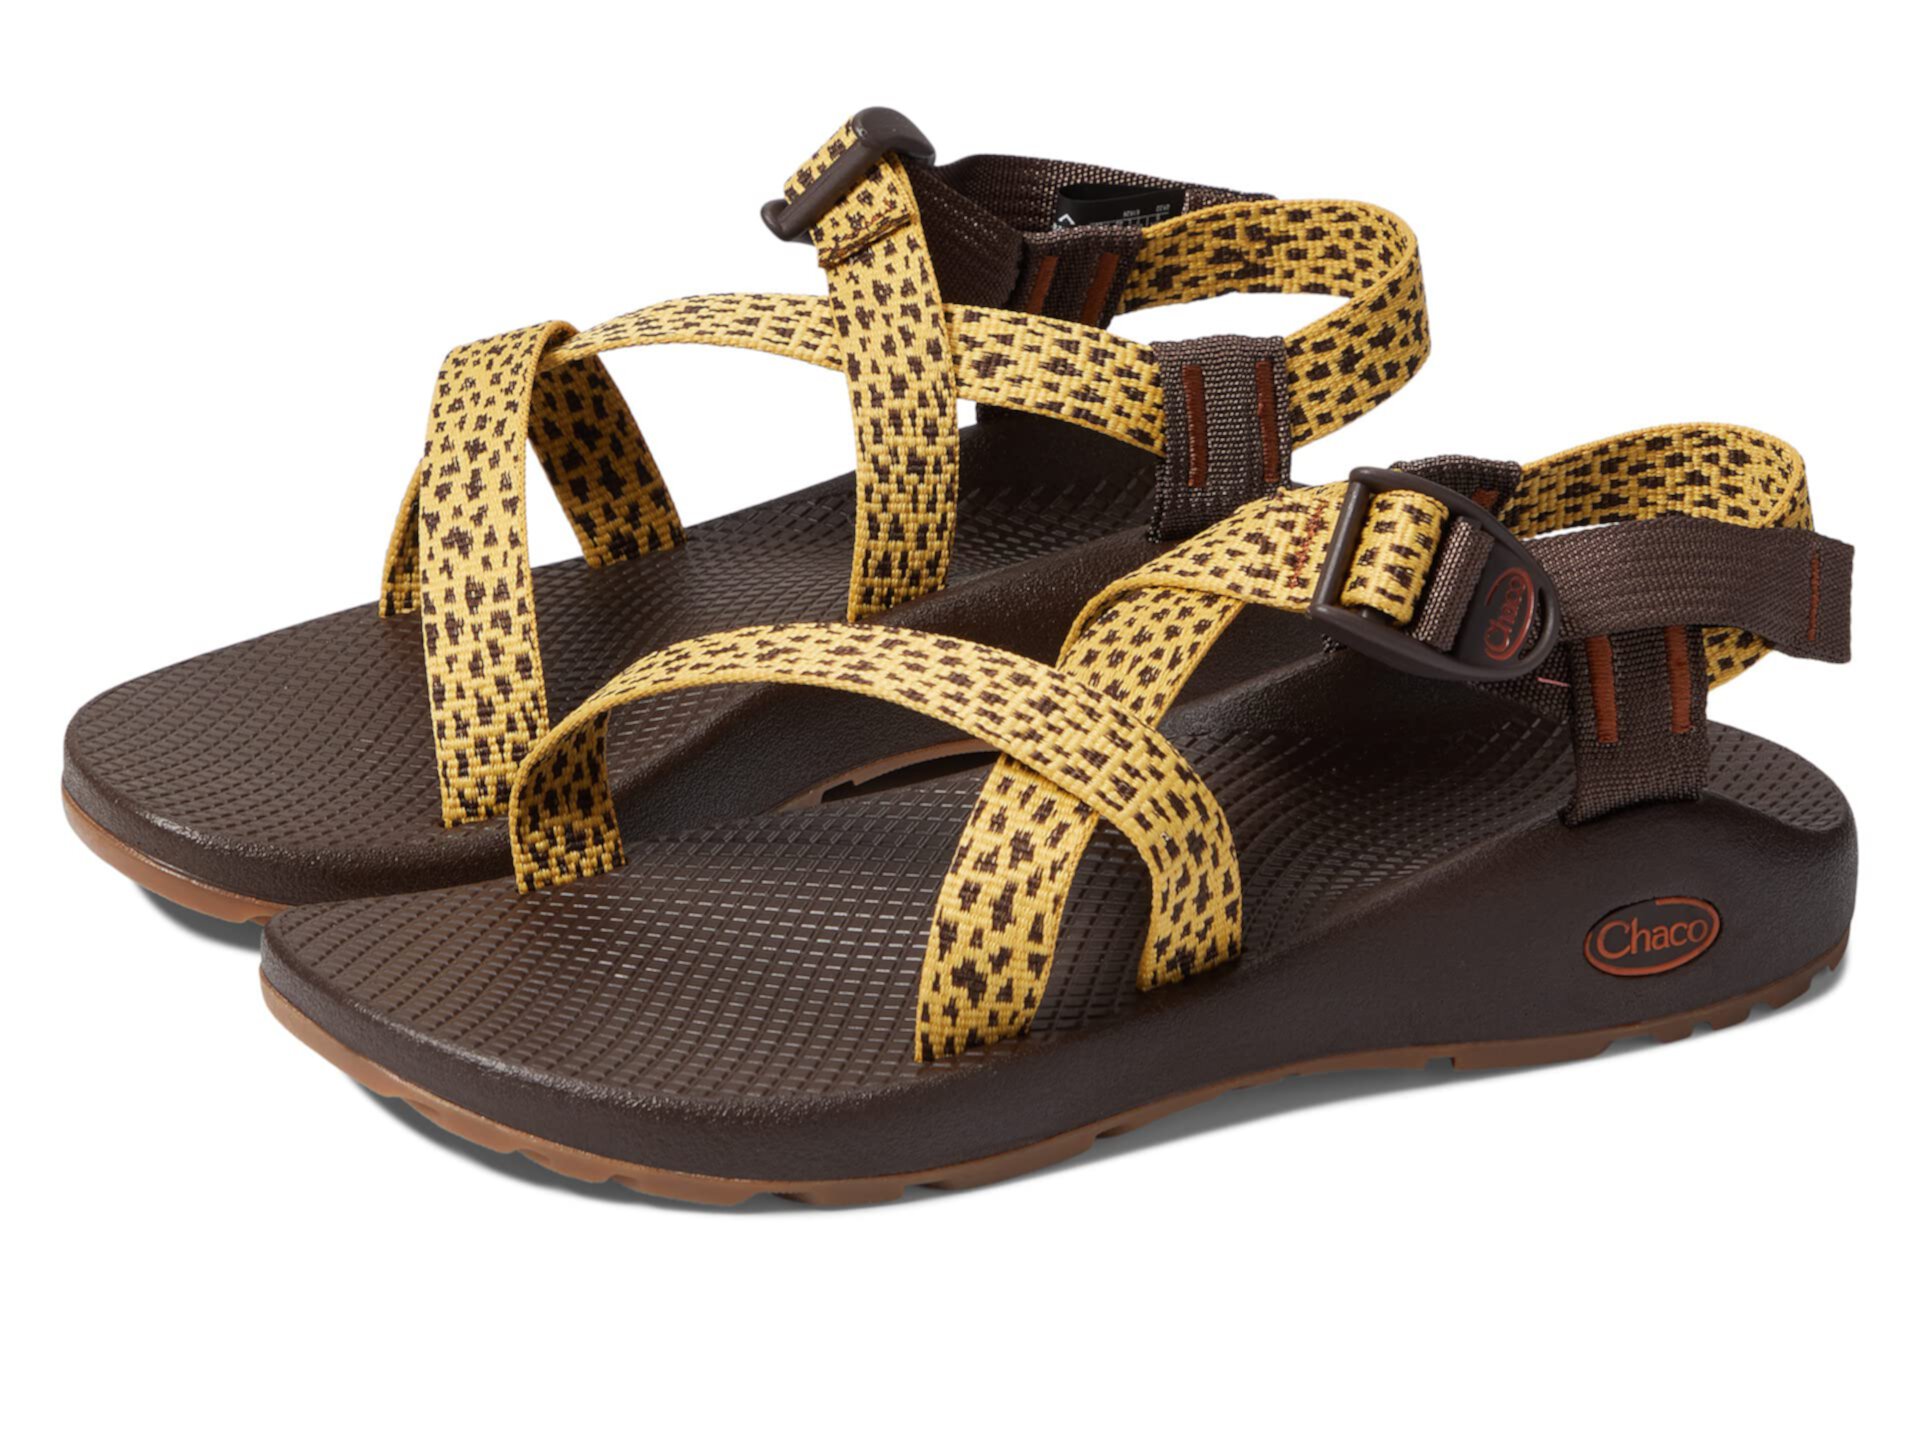 Z / 1® Classic Chaco